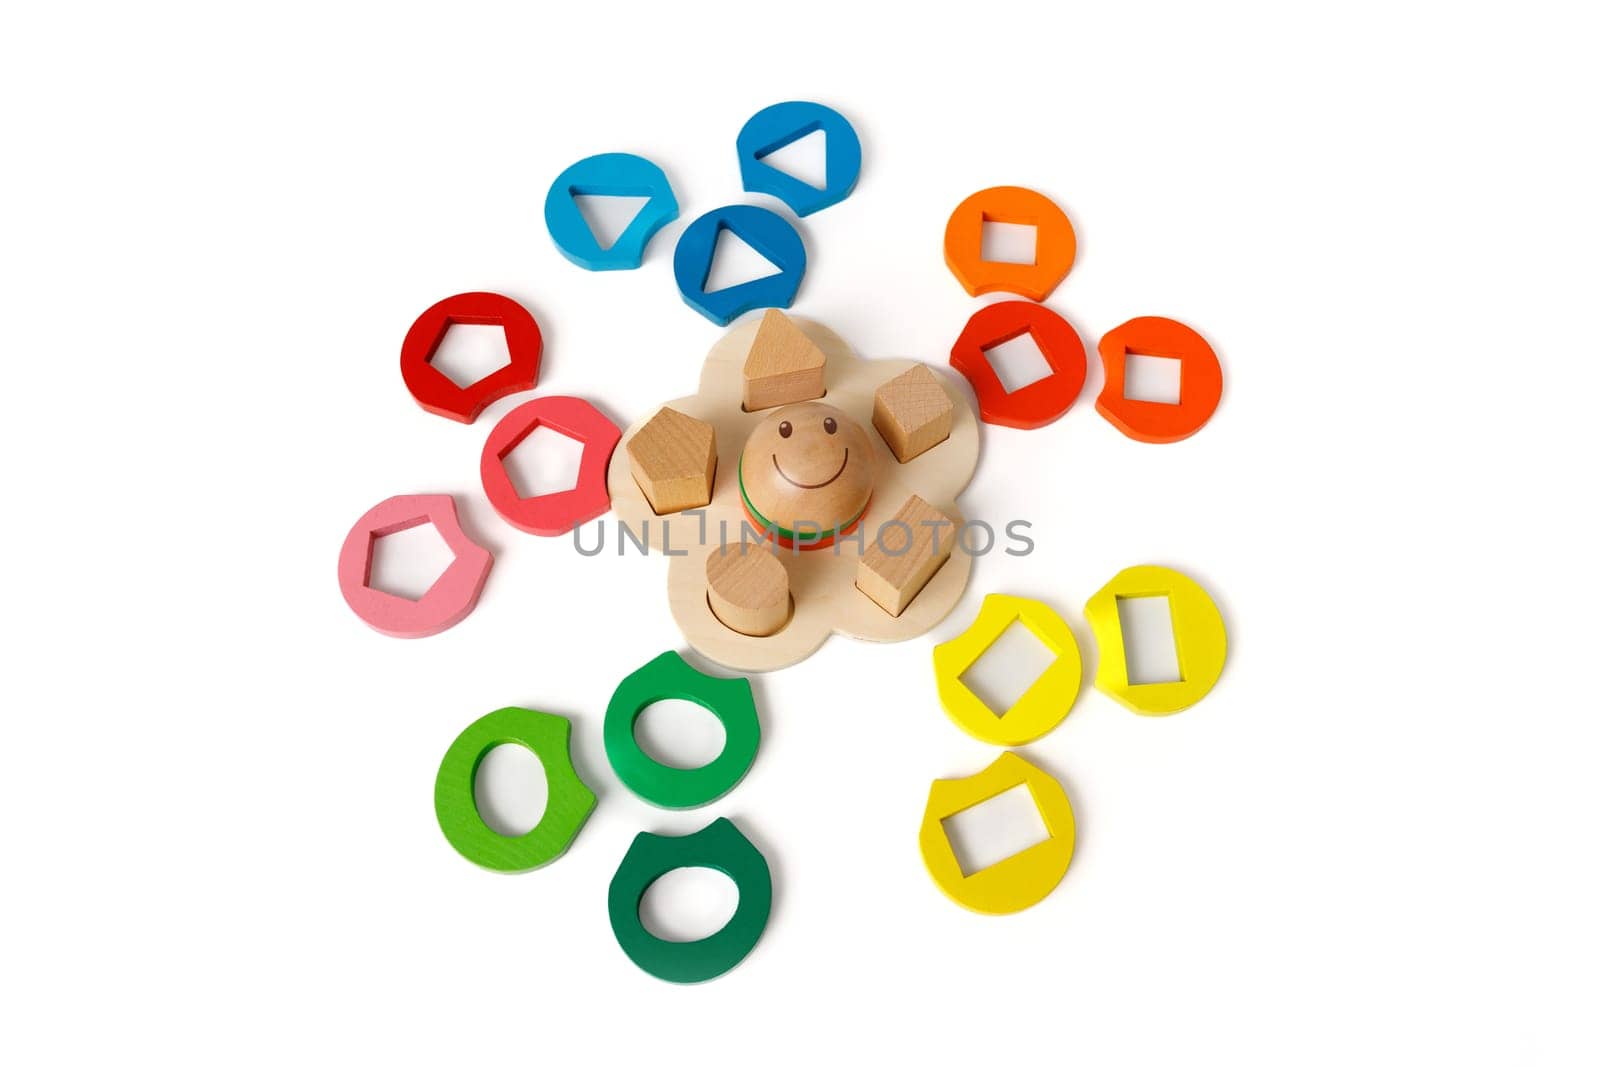 Wooden puzzle toy that develops logic and fine motor skills with colorful blocks of different shapes isolated on white background.